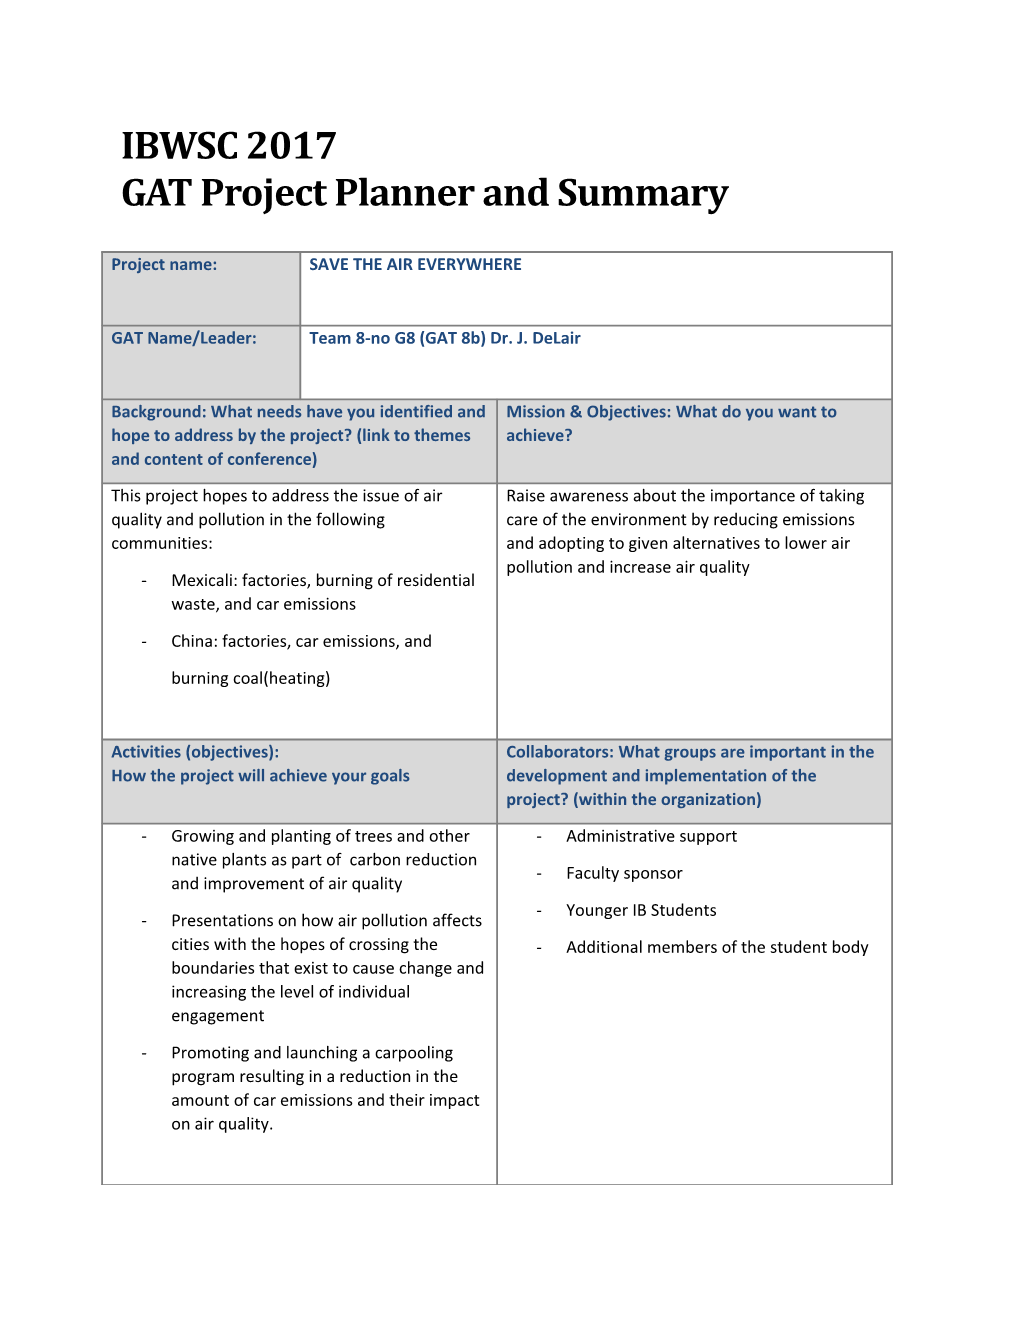 GAT Project Planner and Summary